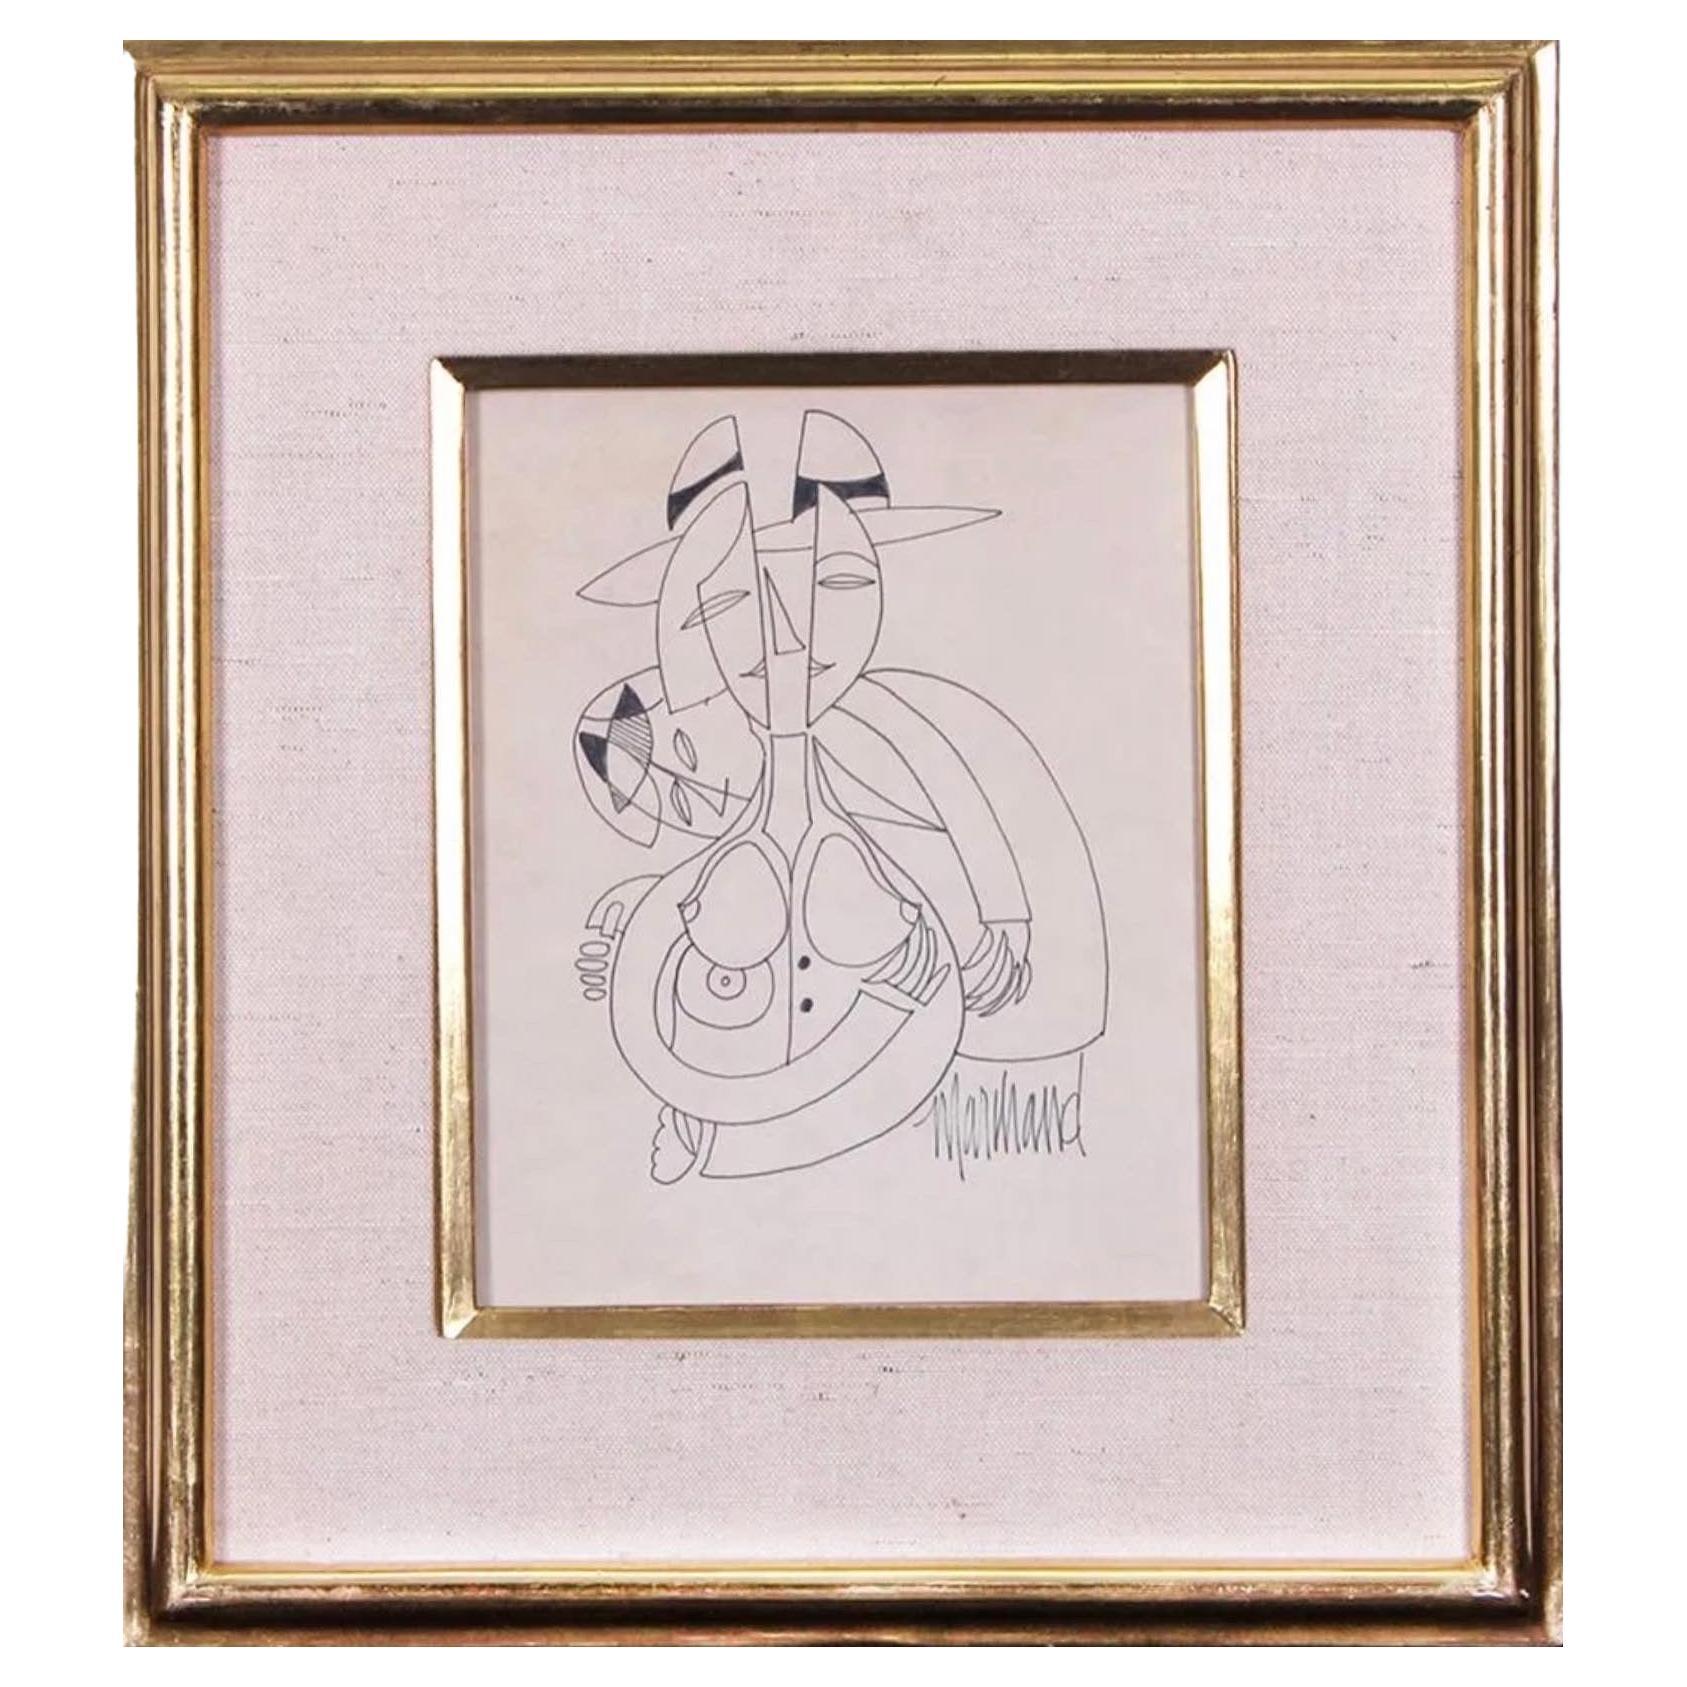 Original Cubist Ink Artwork by Phillipe Marchand, in Gold Frame, 20th Century